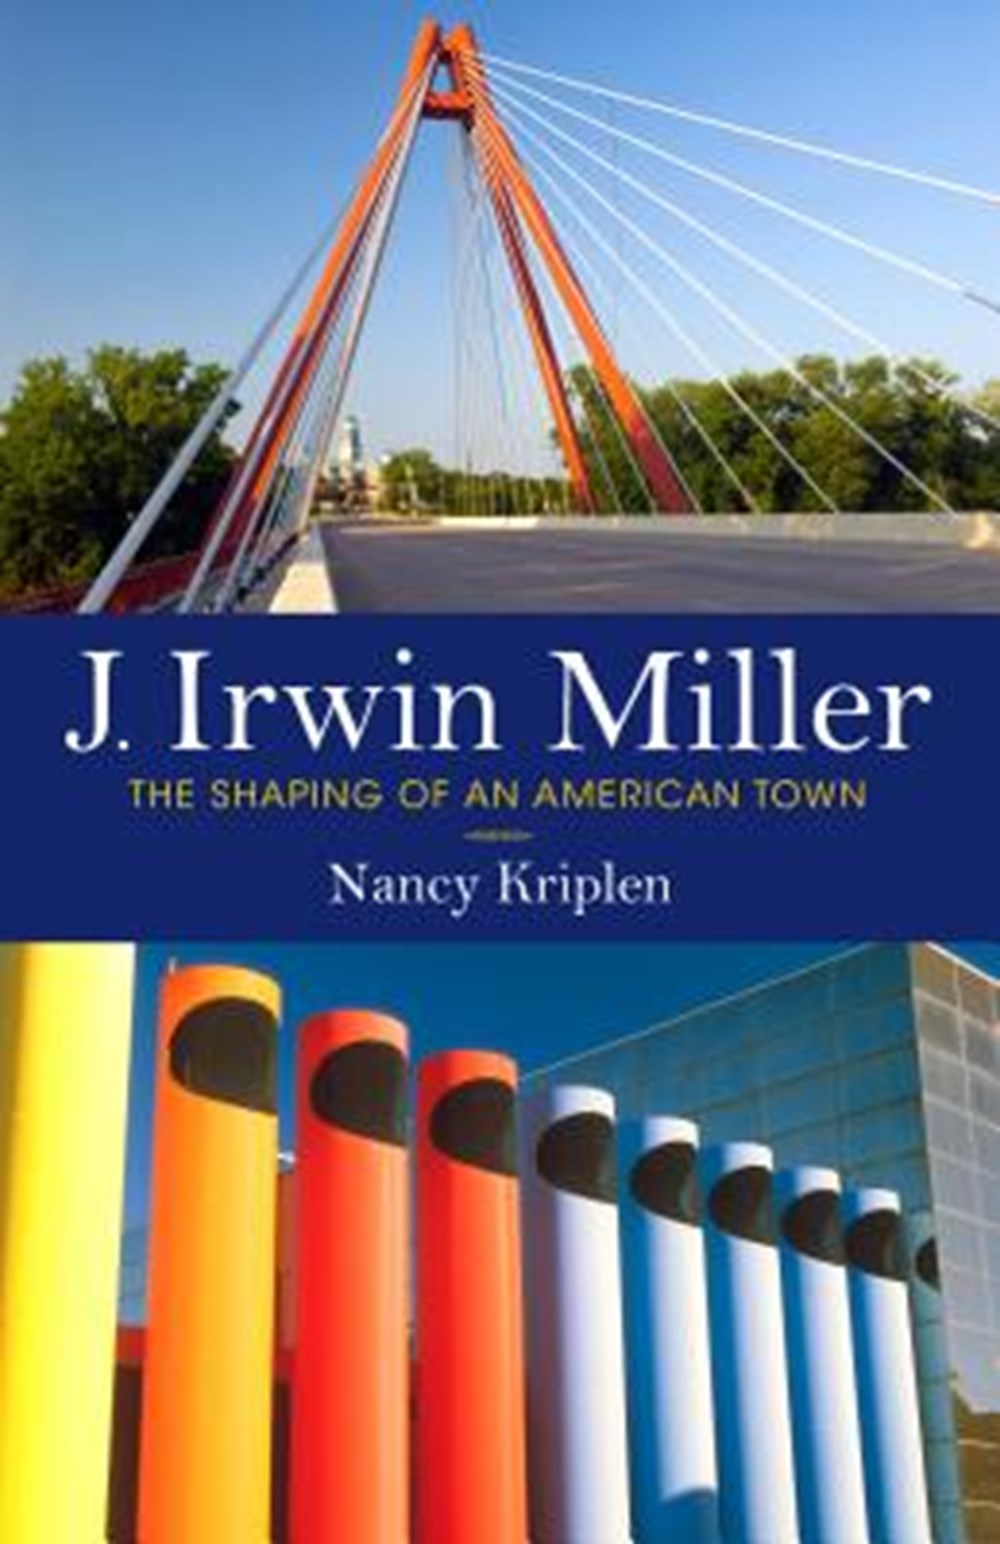 J. Irwin Miller The Shaping of an American Town